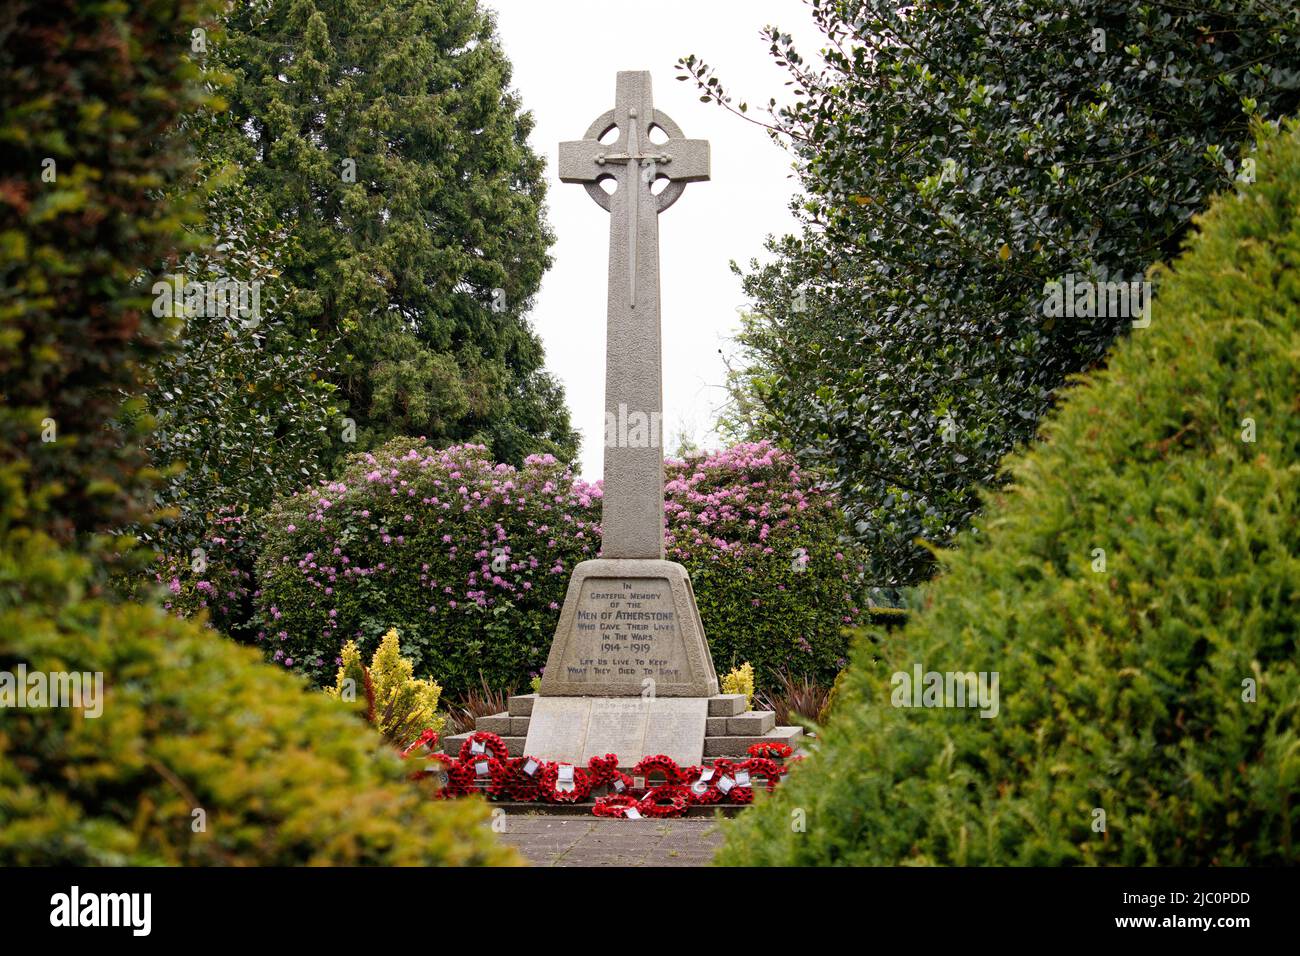 The war memorial in Atherstone cemetery. The monument remembers those from both World Wars One and Two. Each year a remembrance service takes place in the cemtery on the eleventh month on the eleventh day on the eleventh hour. Stock Photo